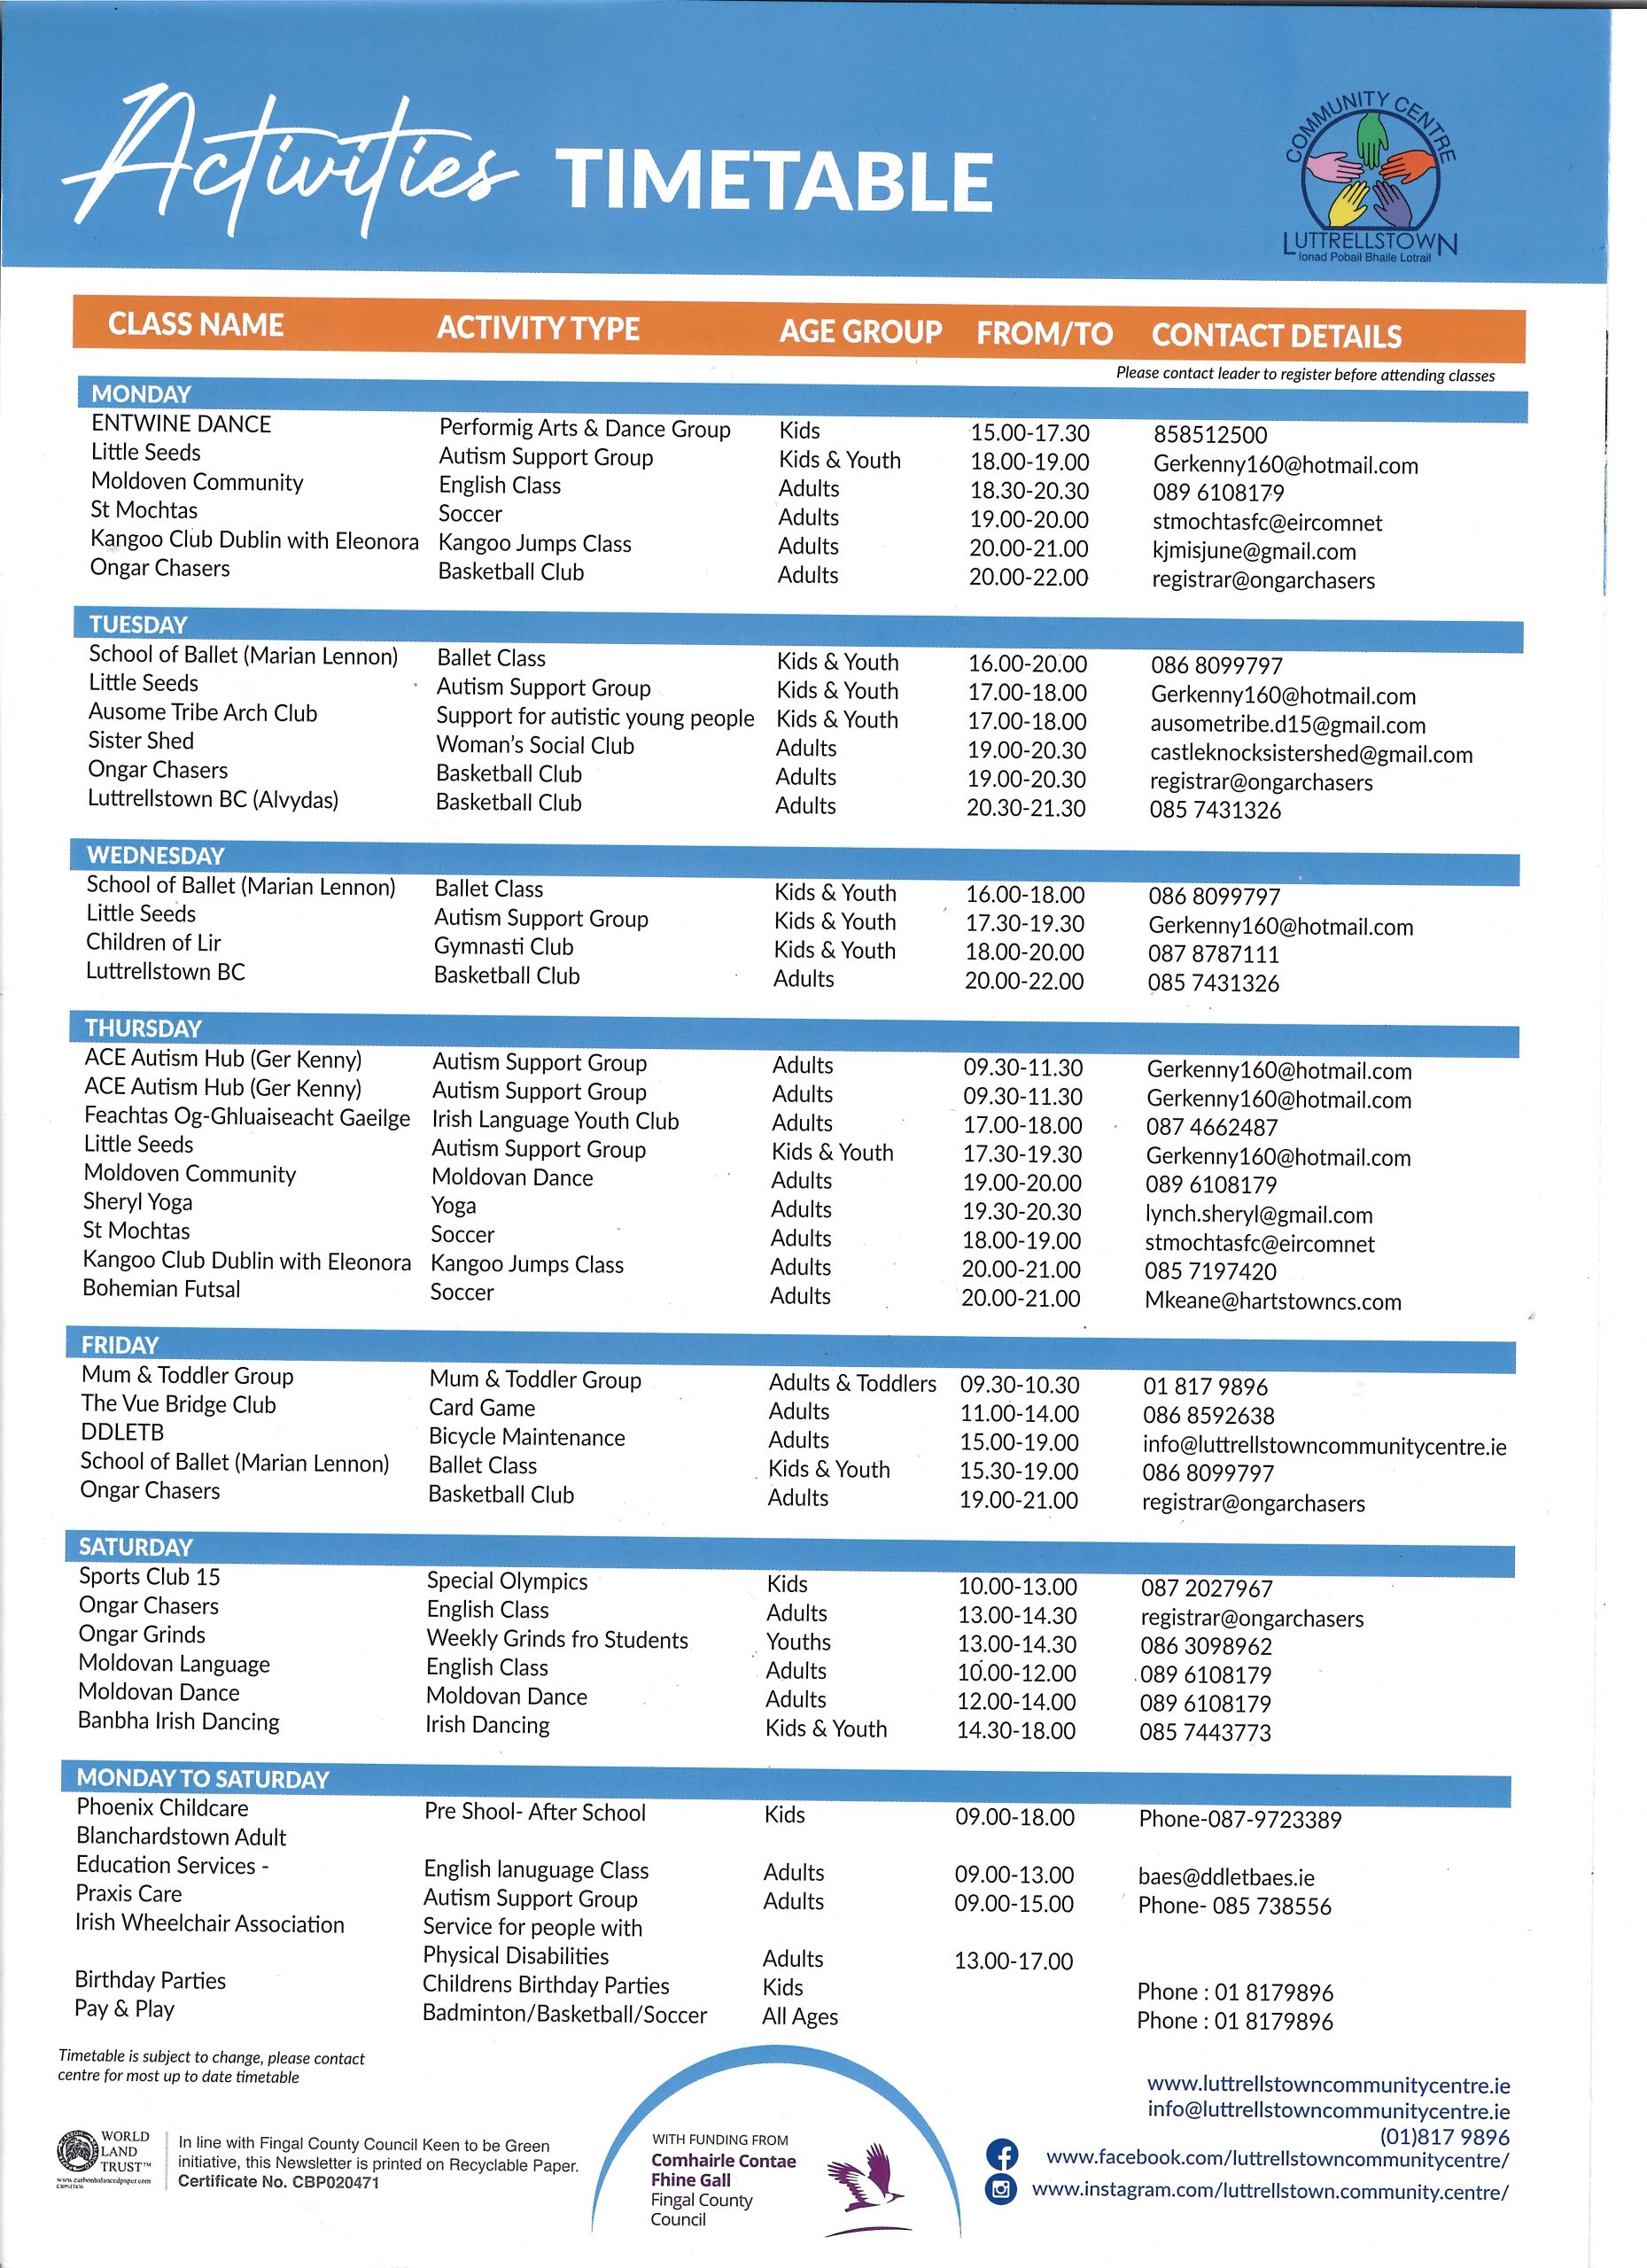 Activities Time Table – Timetable is subject to change